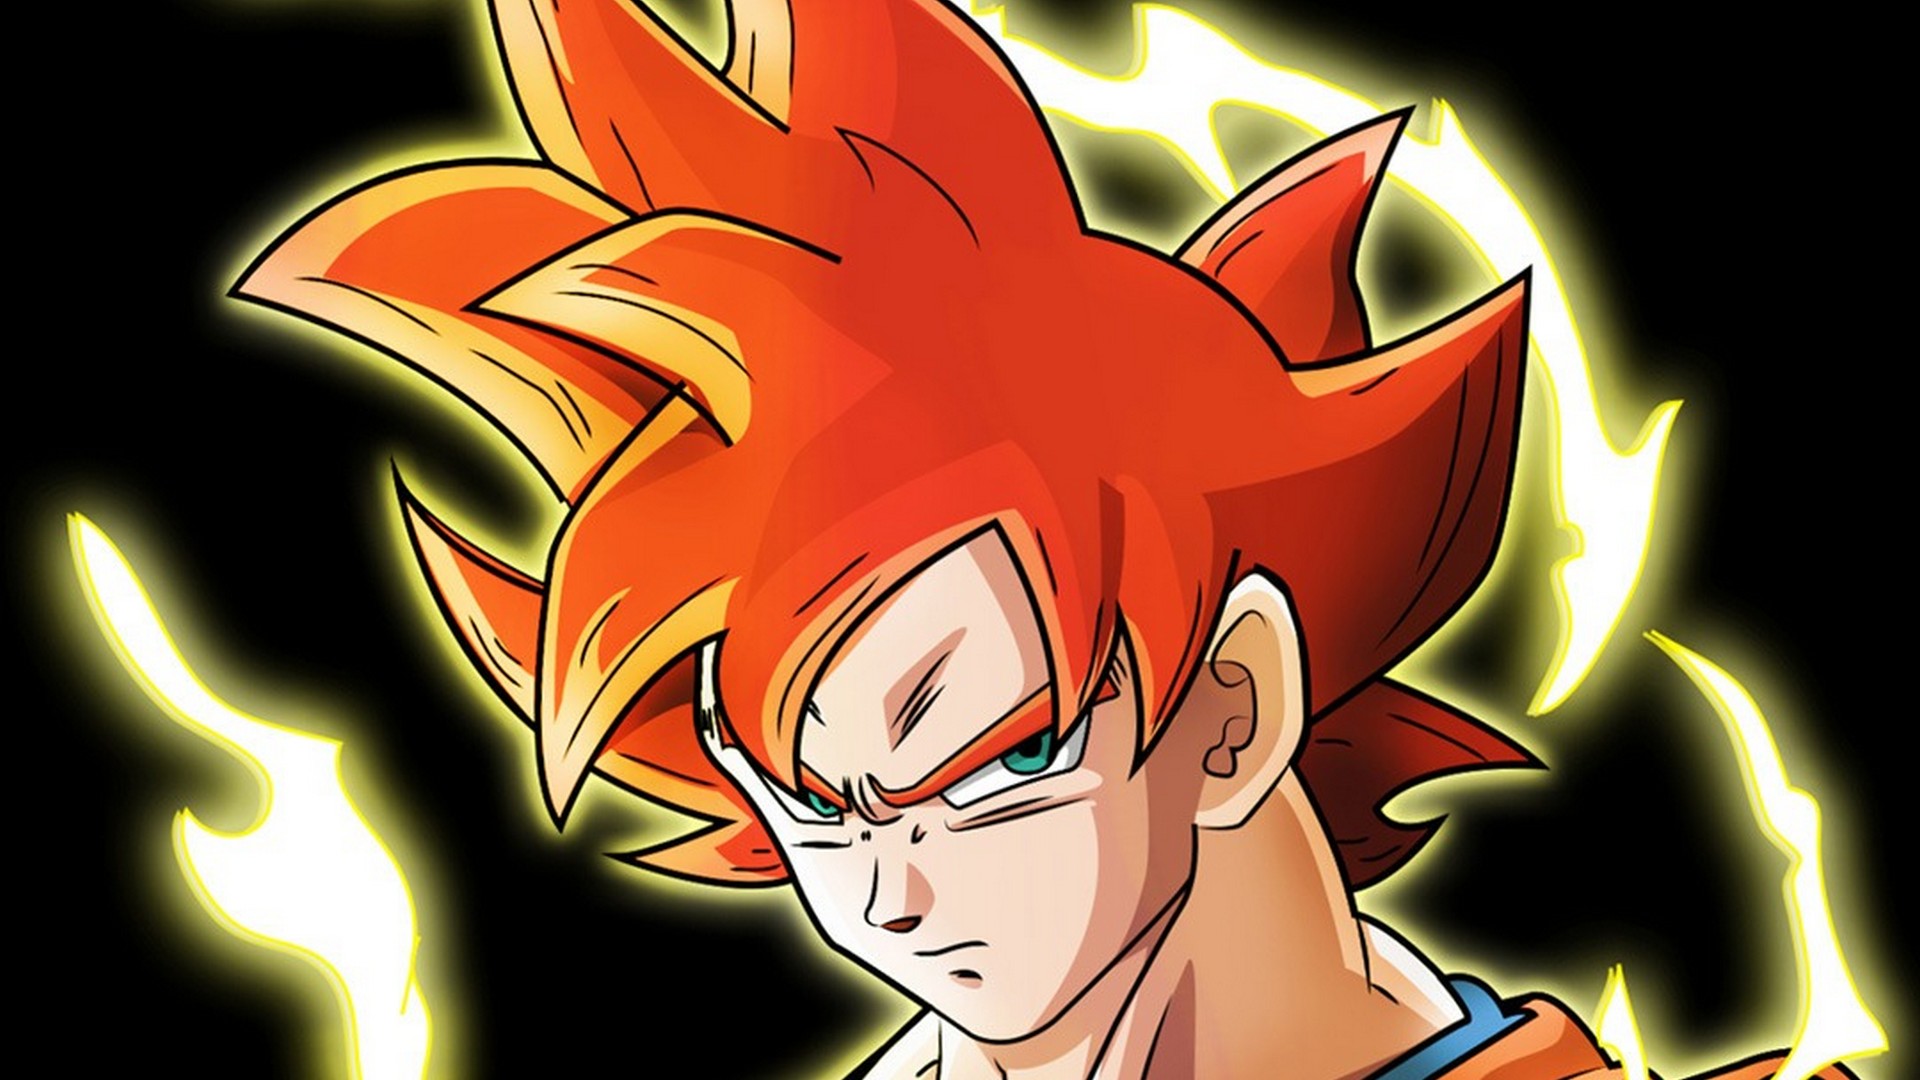 Goku Super Saiyan God Background Wallpaper HD with image resolution 1920x1080 pixel. You can make this wallpaper for your Desktop Computer Backgrounds, Mac Wallpapers, Android Lock screen or iPhone Screensavers